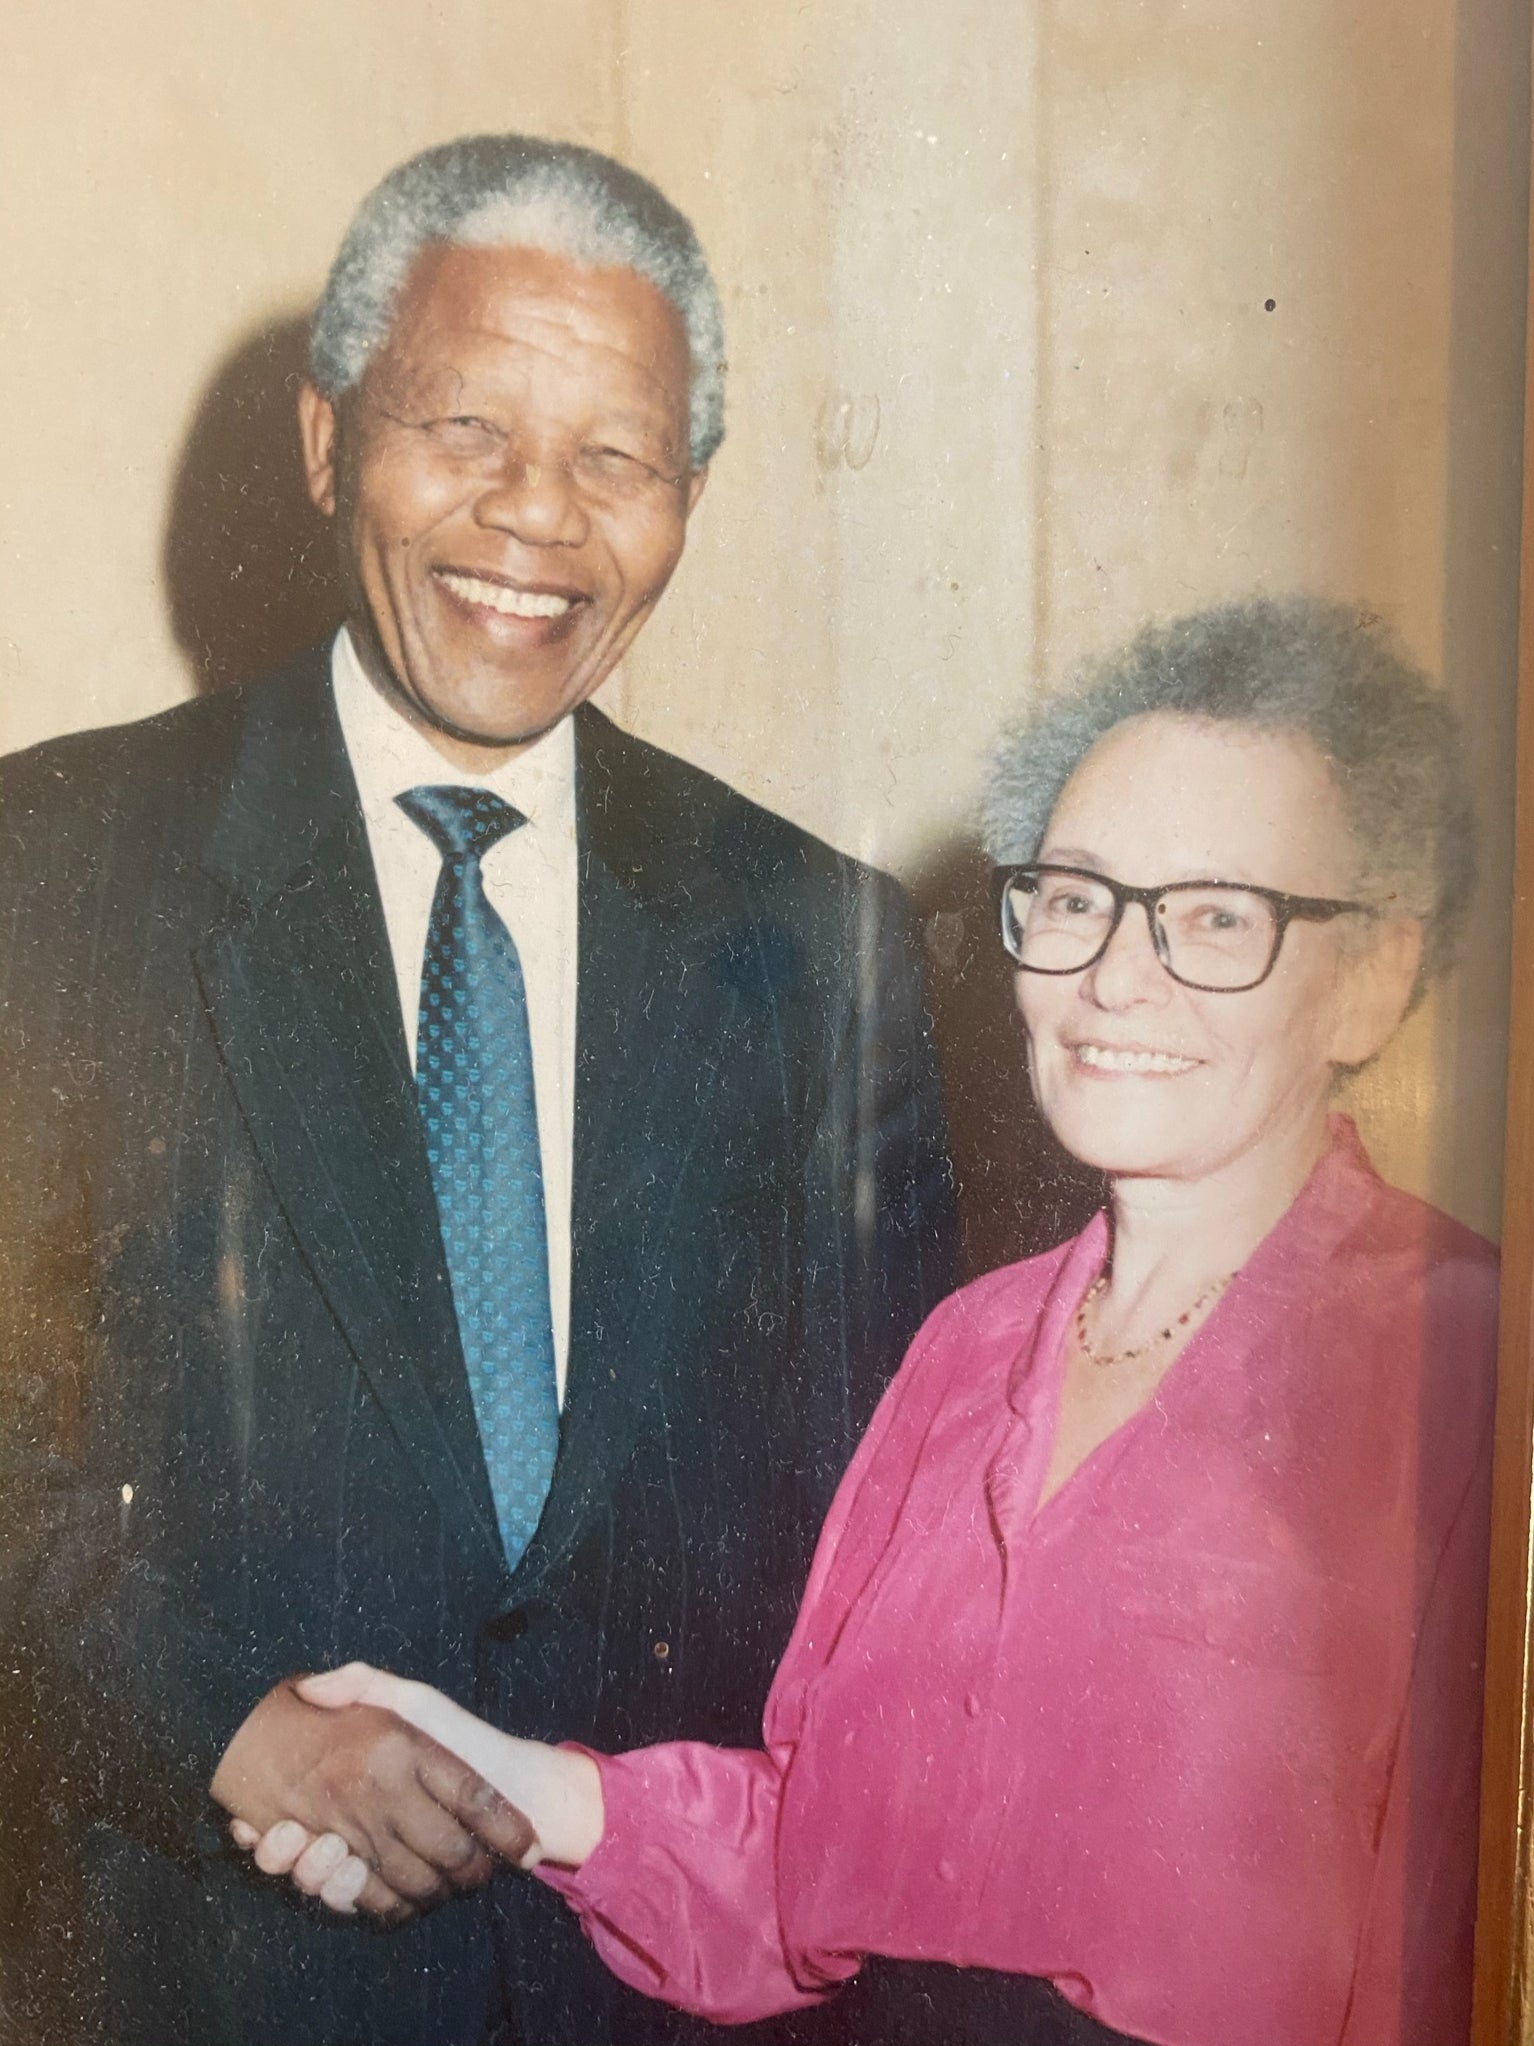 With Nelson Mandela in 1993